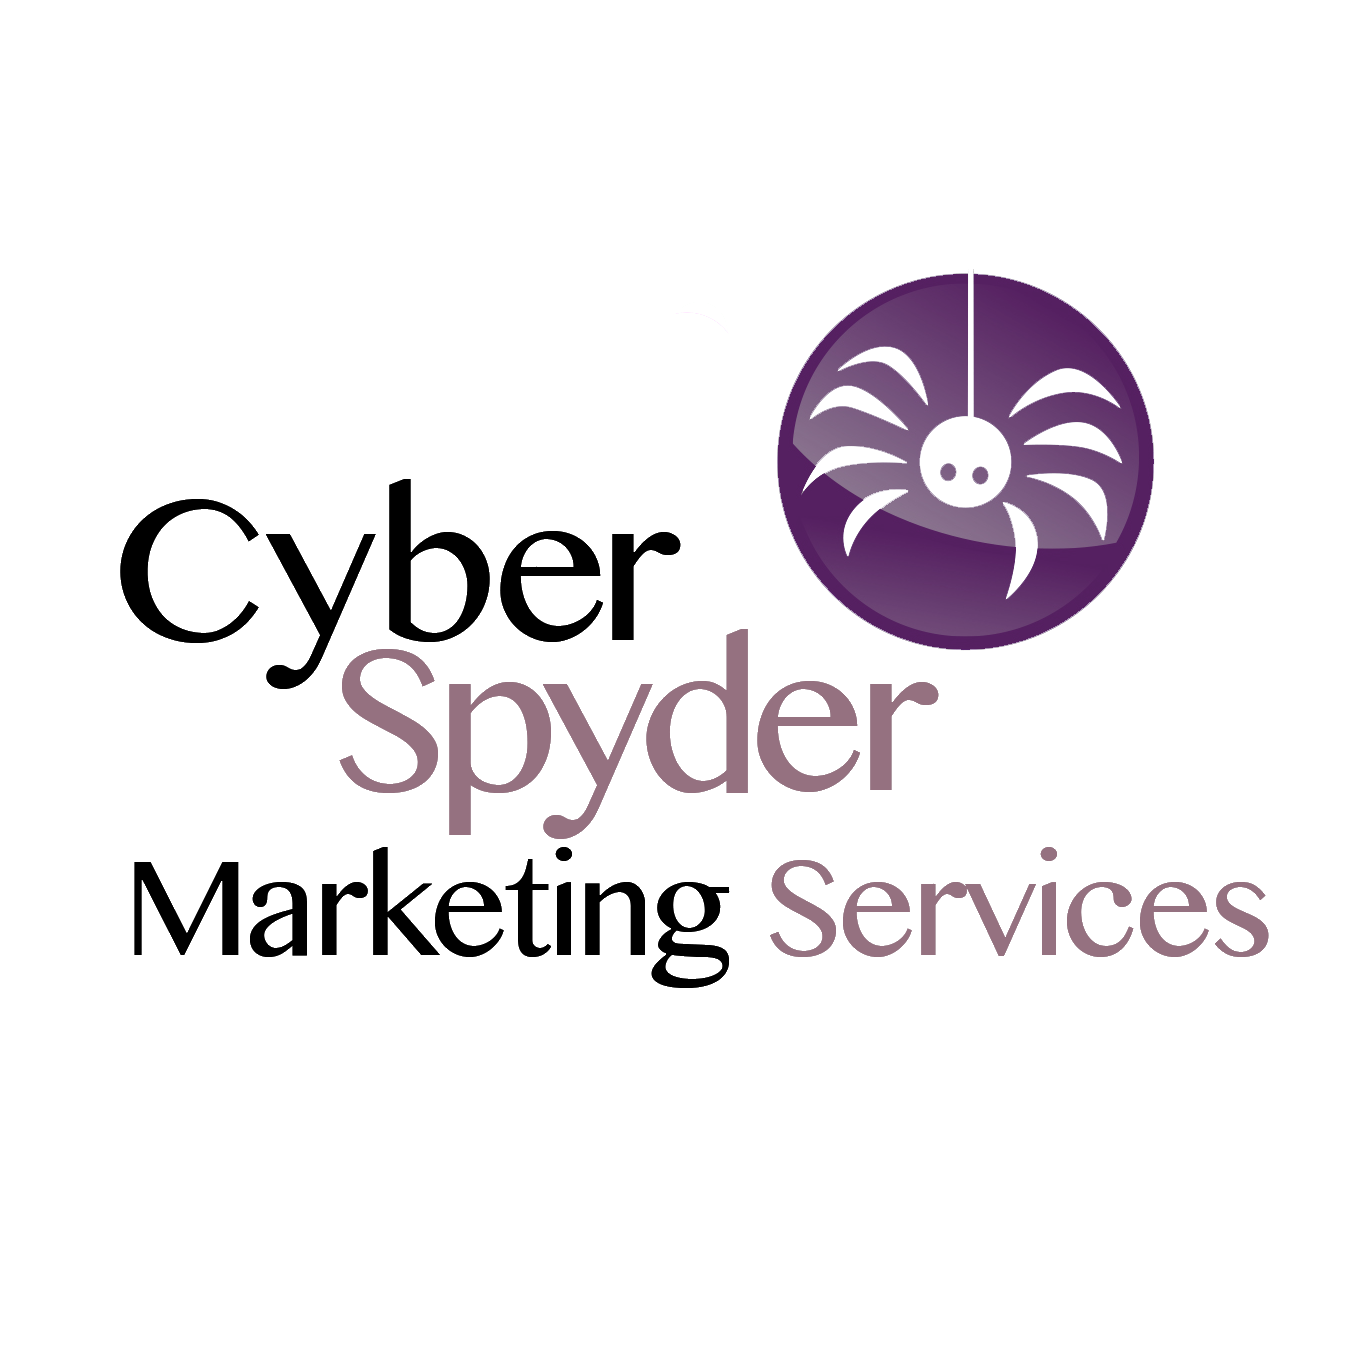 Business logo of CyberSpyder Marketing Services